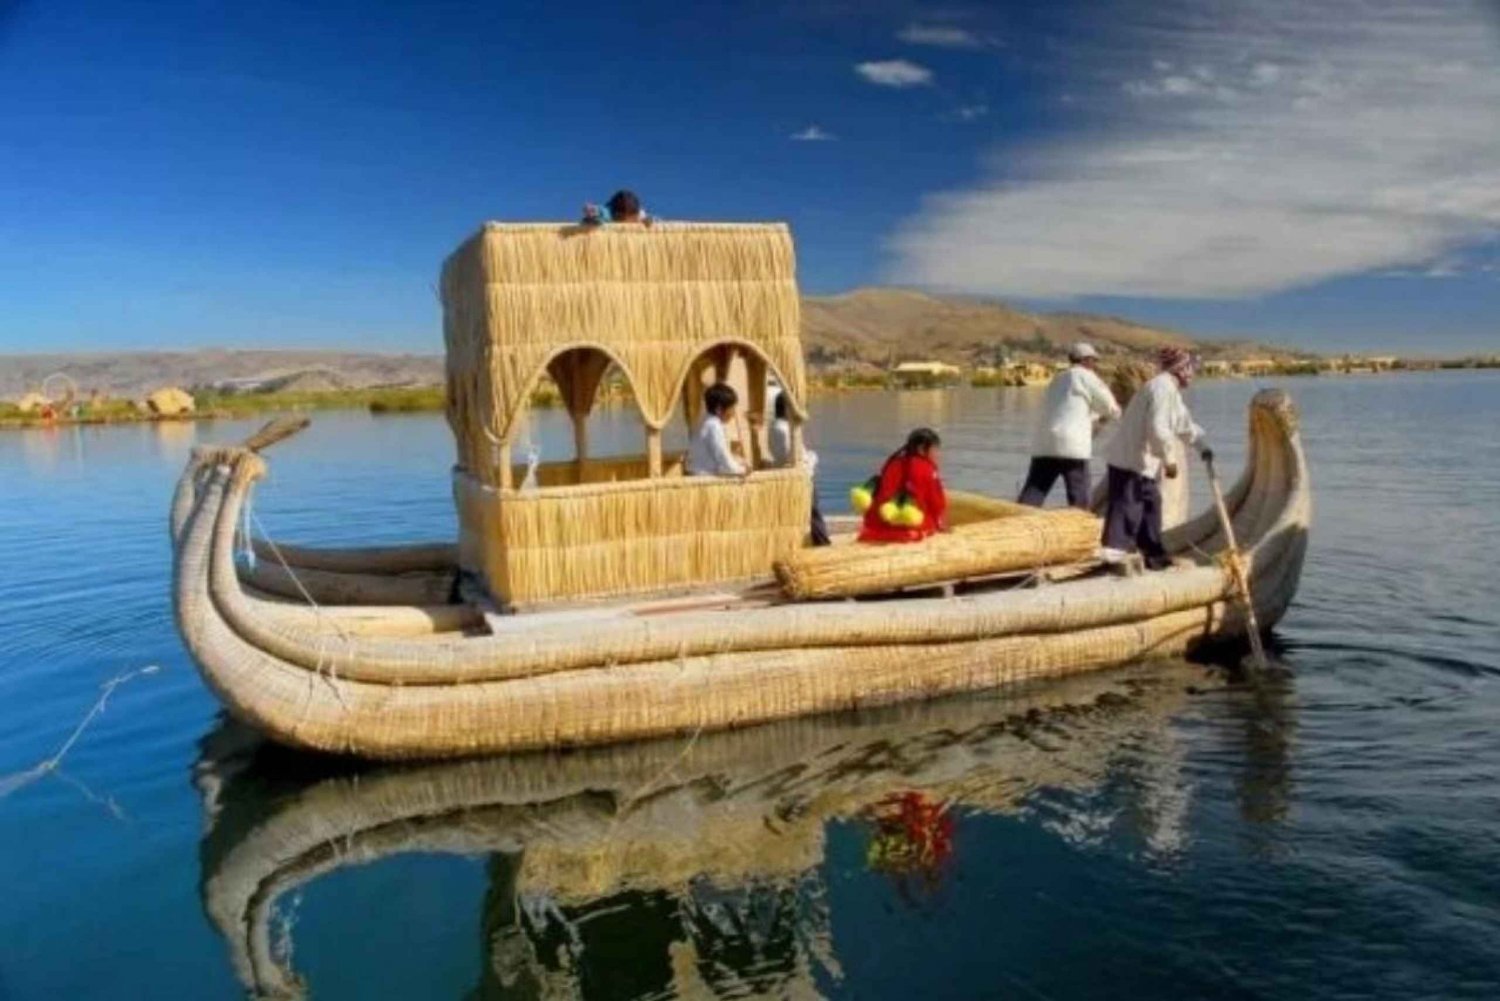 Full Day to Uros Floating Islands and Amantani Island